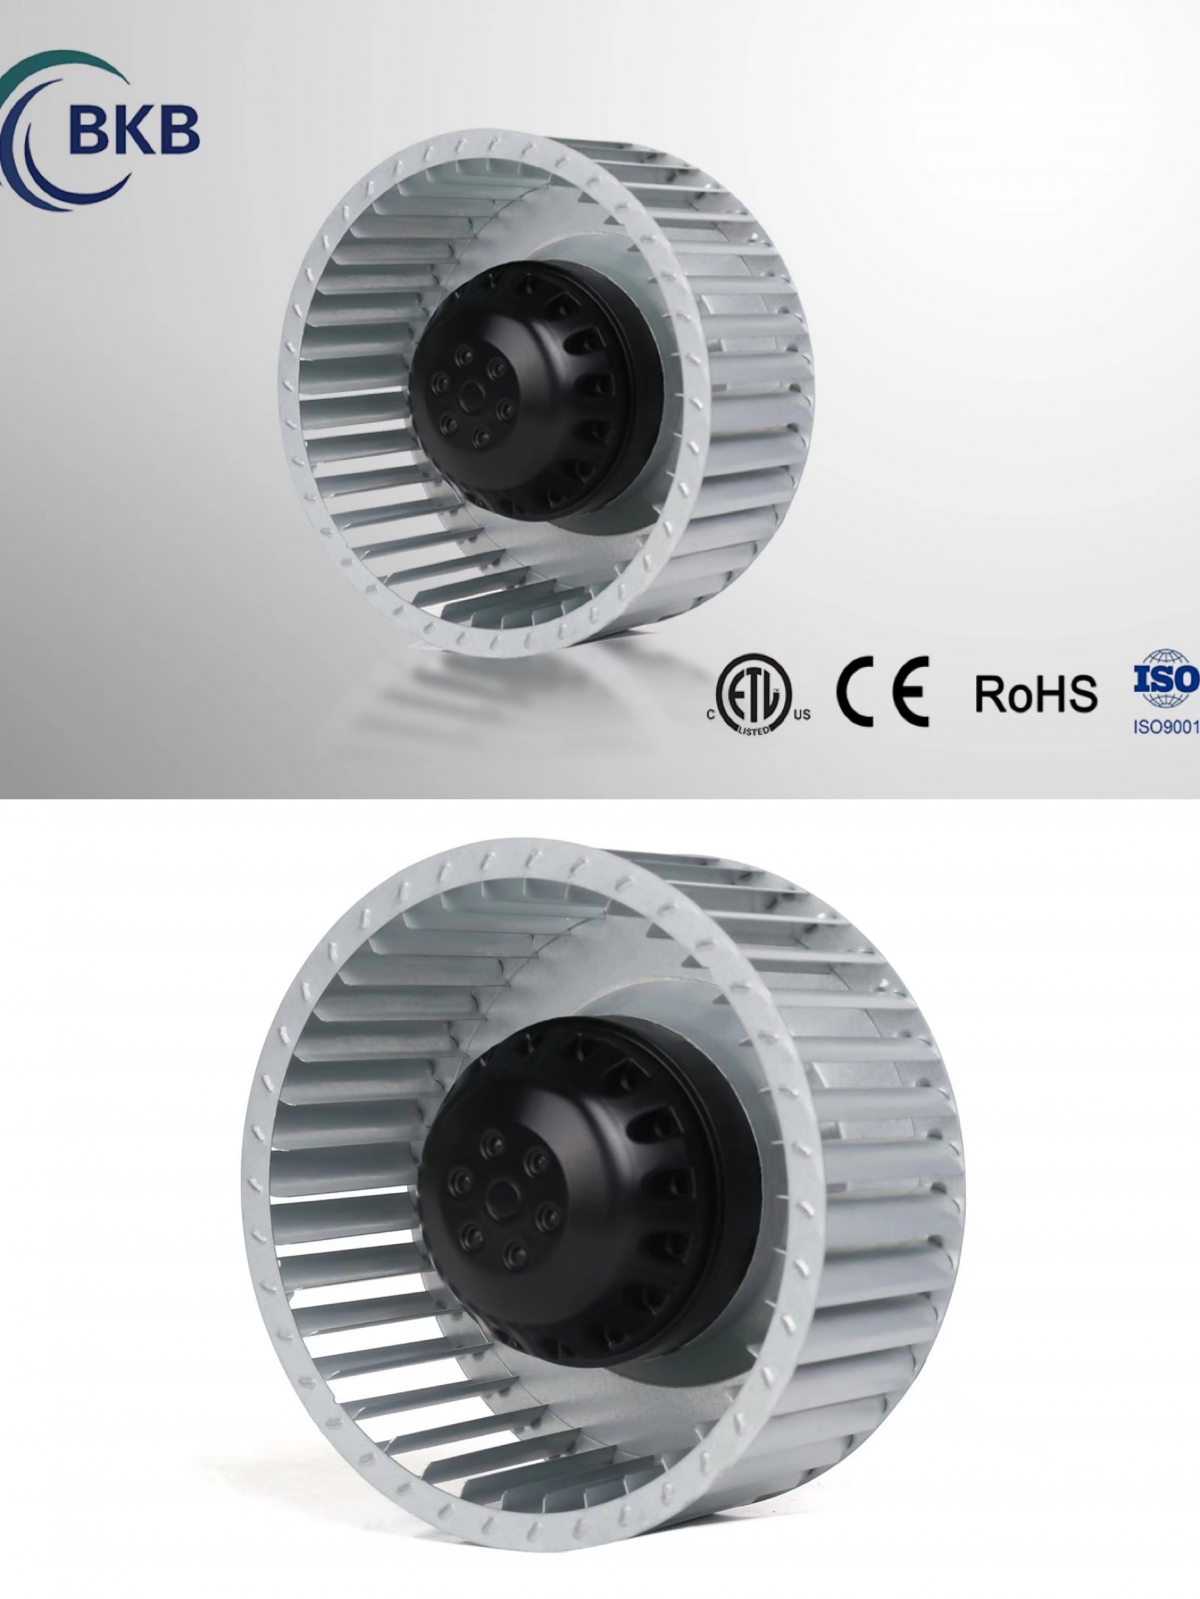 ETL HYDROPONIC INLINE FAN &Forward curved centrifugal fans Φ160 SUPPLIER AND MANUFACTURER IN CHINA .-SUNLIGHT BLOWER,Centrifugal Fans, Inline Fans,Motors,Backward curved centrifugal fans ,Forward curved centrifugal fans ,inlet fans, EC fans